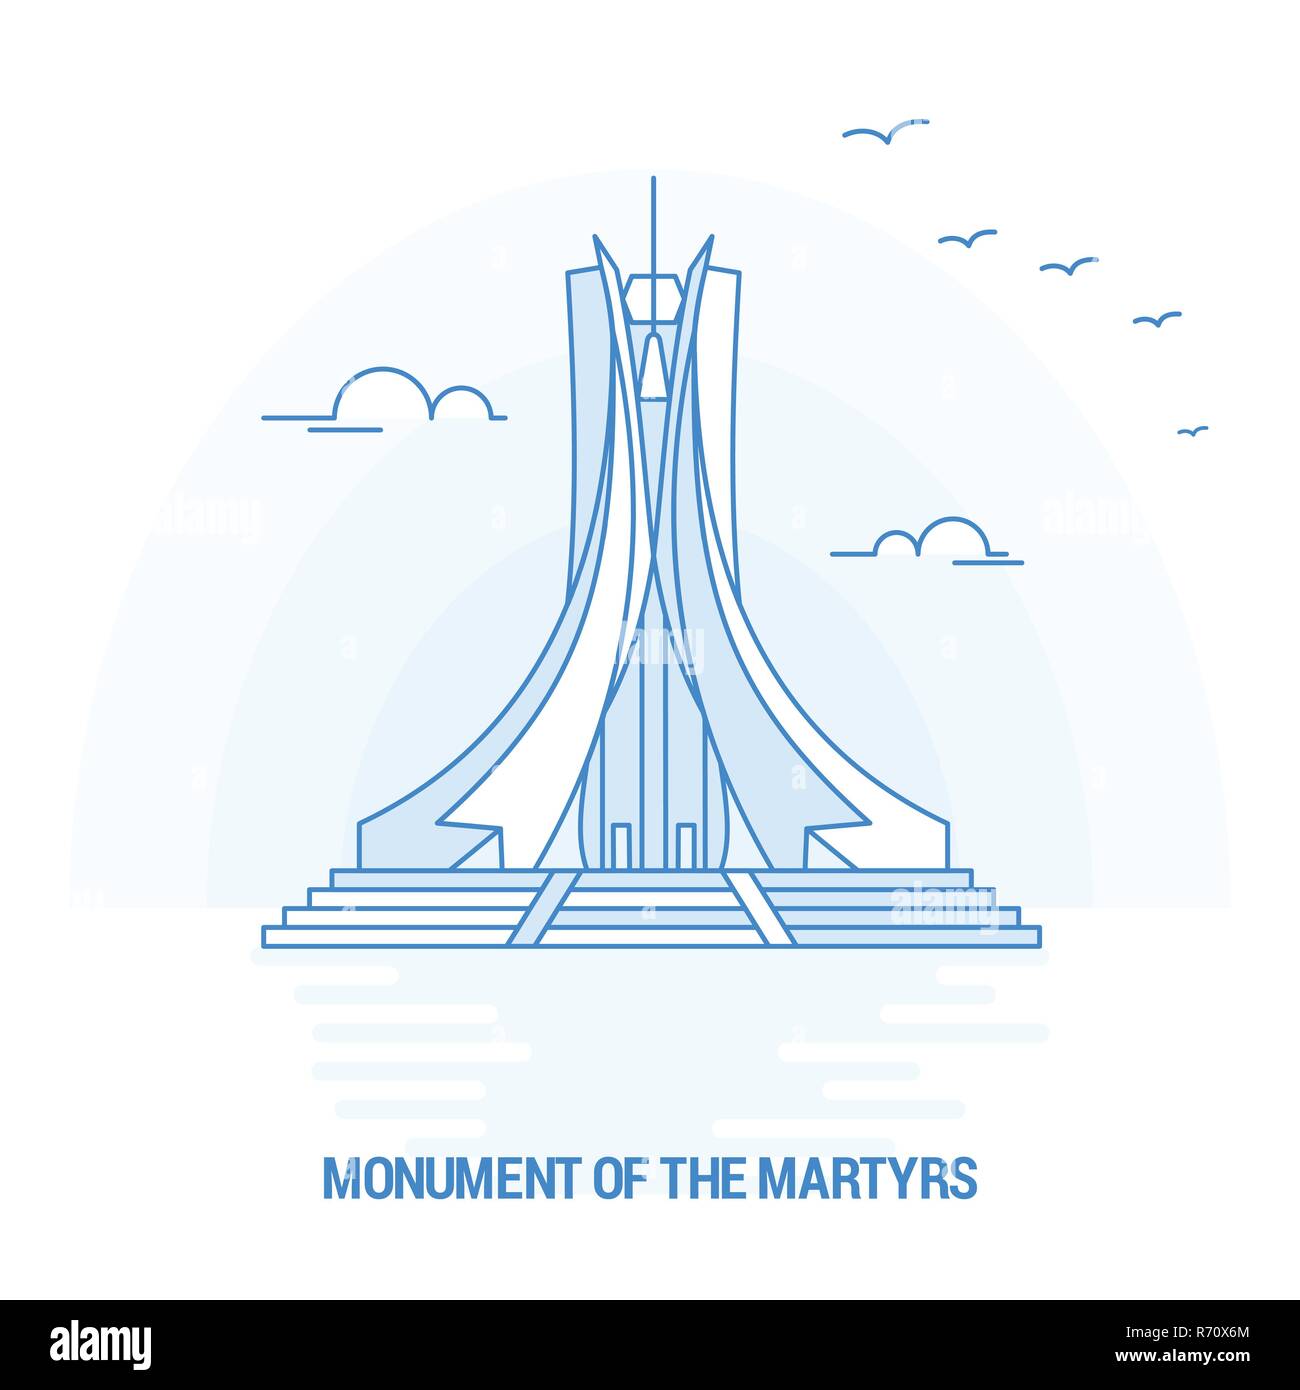 MONUMENT OF THE MARTYRS Blue Landmark. Creative background and Poster Template Stock Vector